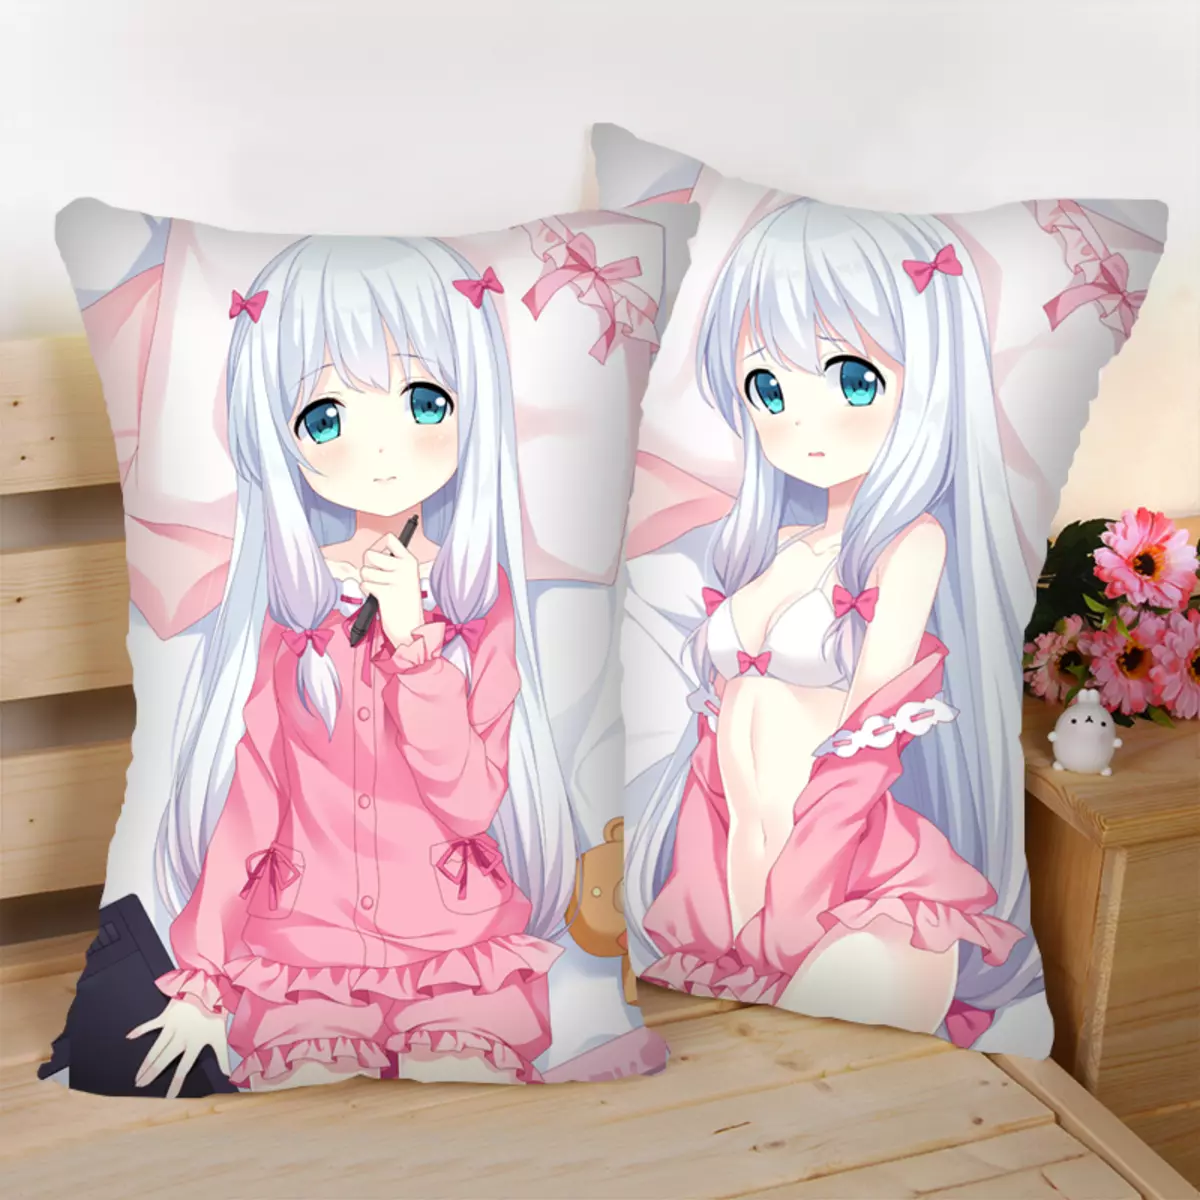 Anime-pillows: Dakimakur hug in full length, long big pillows with a print of girls and other characters 20757_3